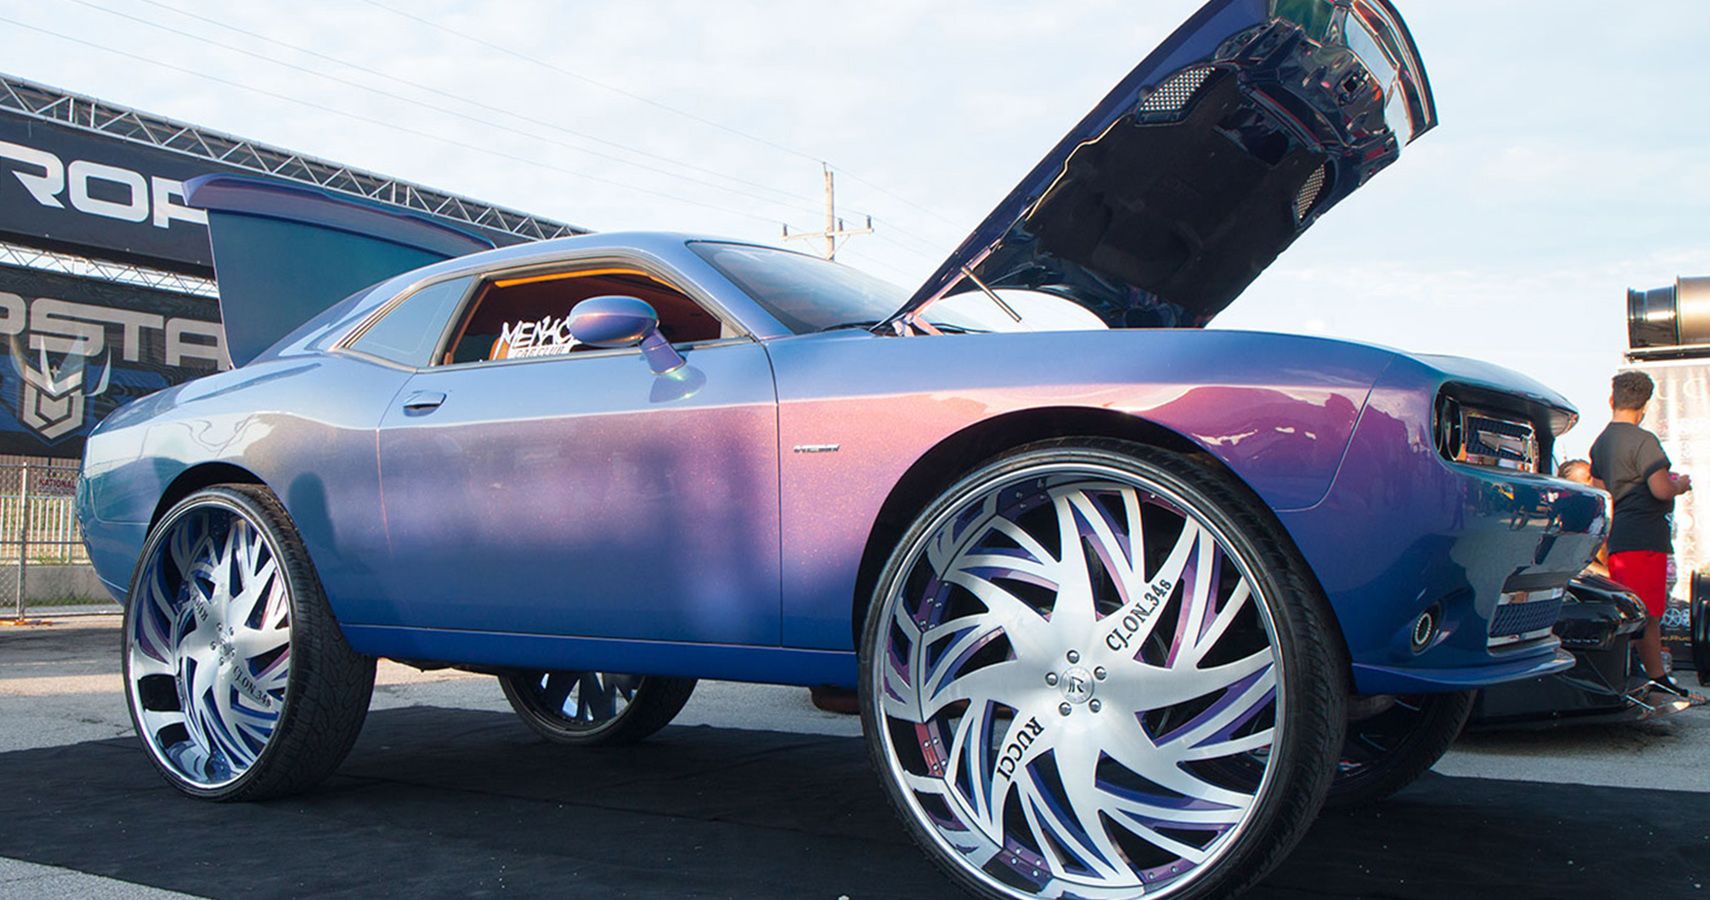 A Psychedelic Purple Donk Of A Dodge Challenger